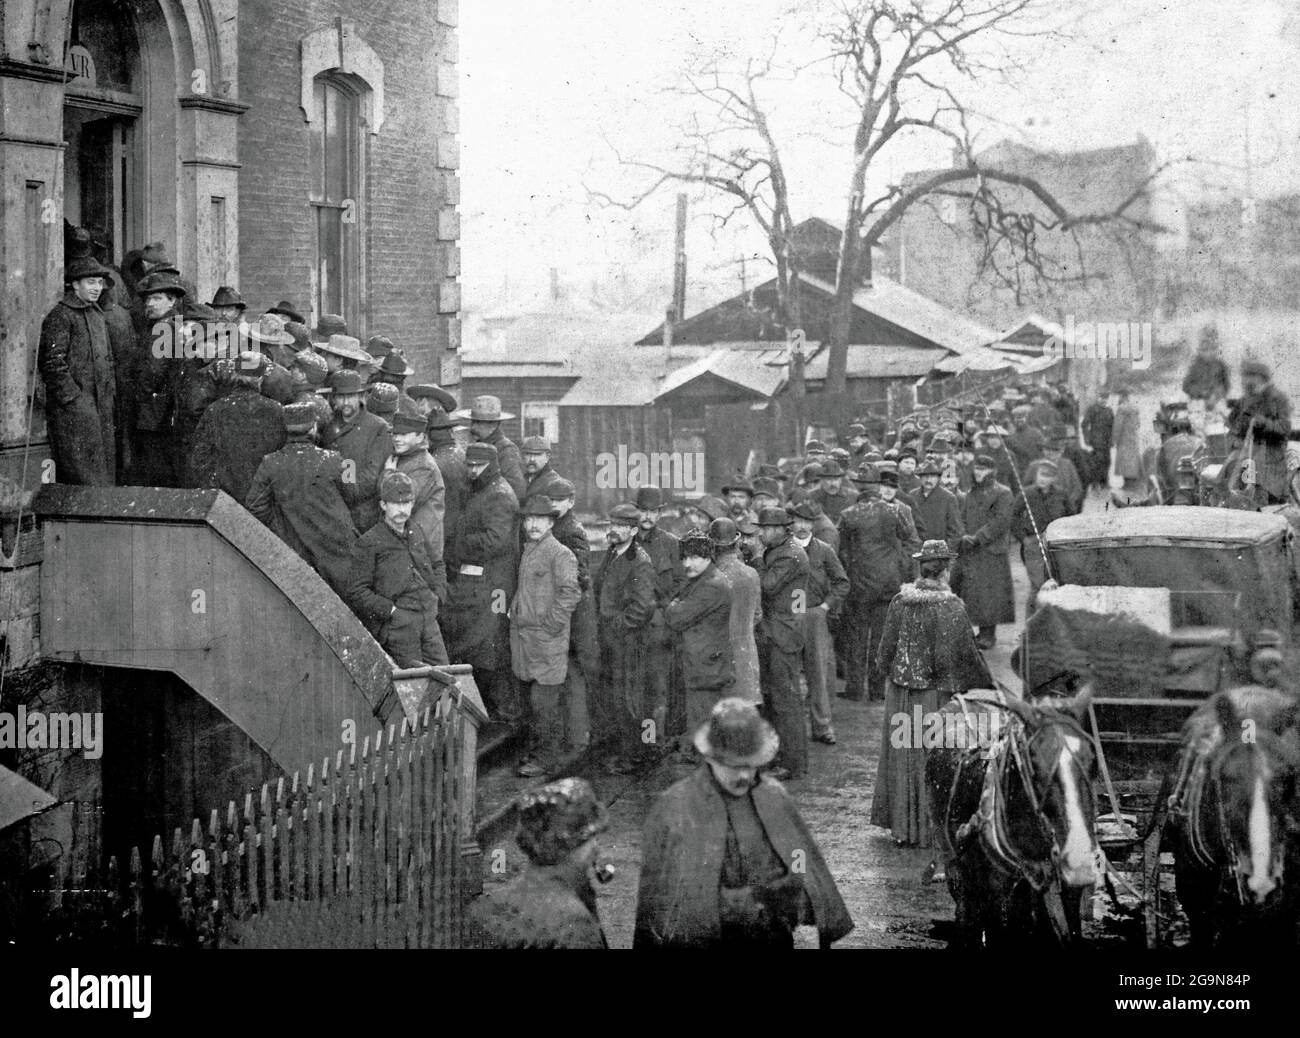 VICTORIA, BRITISH COLUMBIA, CANADA - 21 February 1898 - Klondikers form a long queue to buy mining licenses at Customs House, Victoria, British Columb Stock Photo